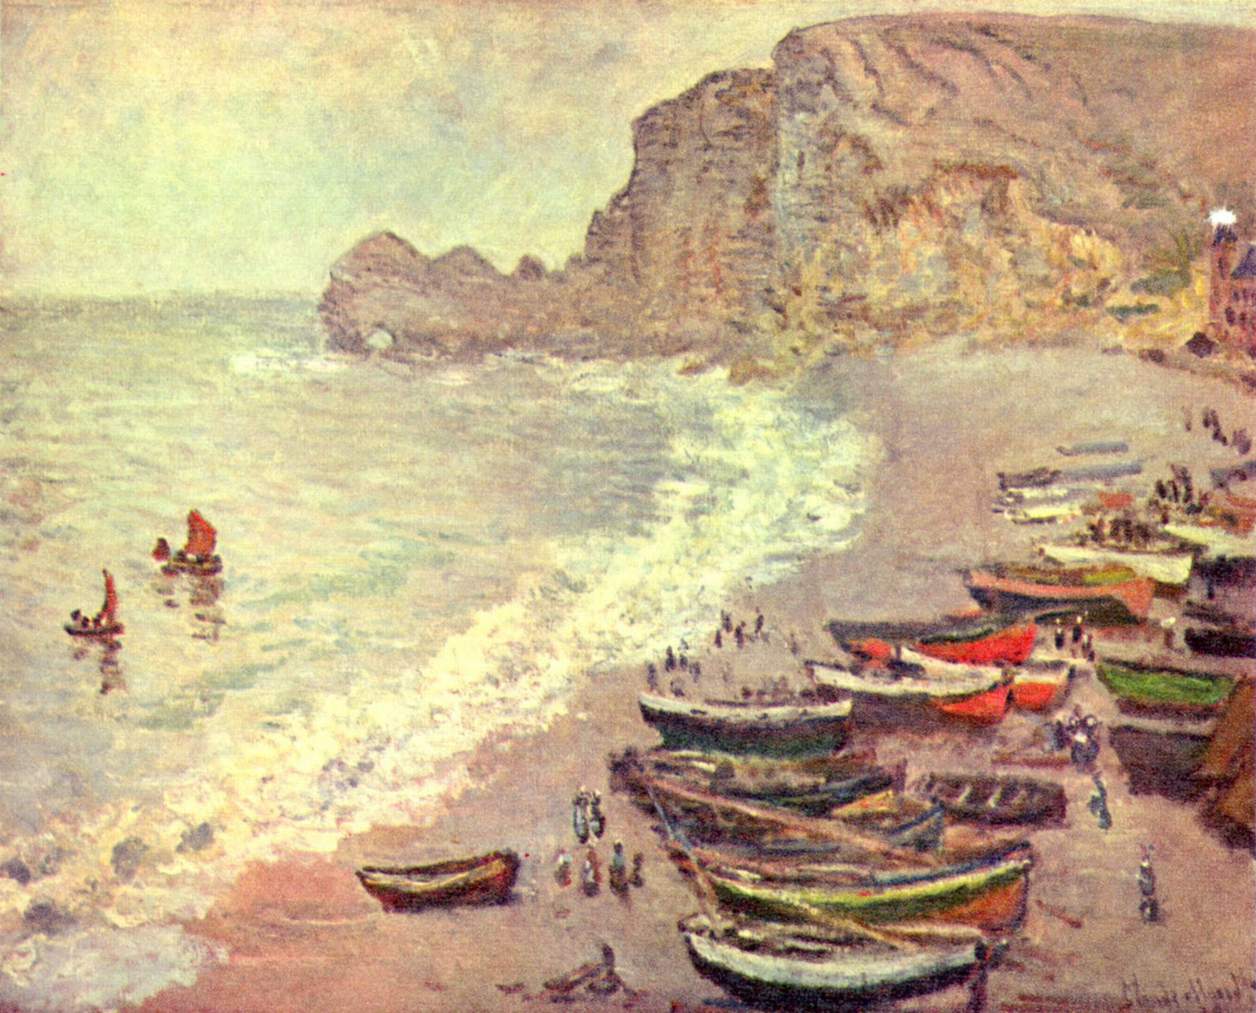 A landscape view of several boats on a shoreline with cliffs in the background